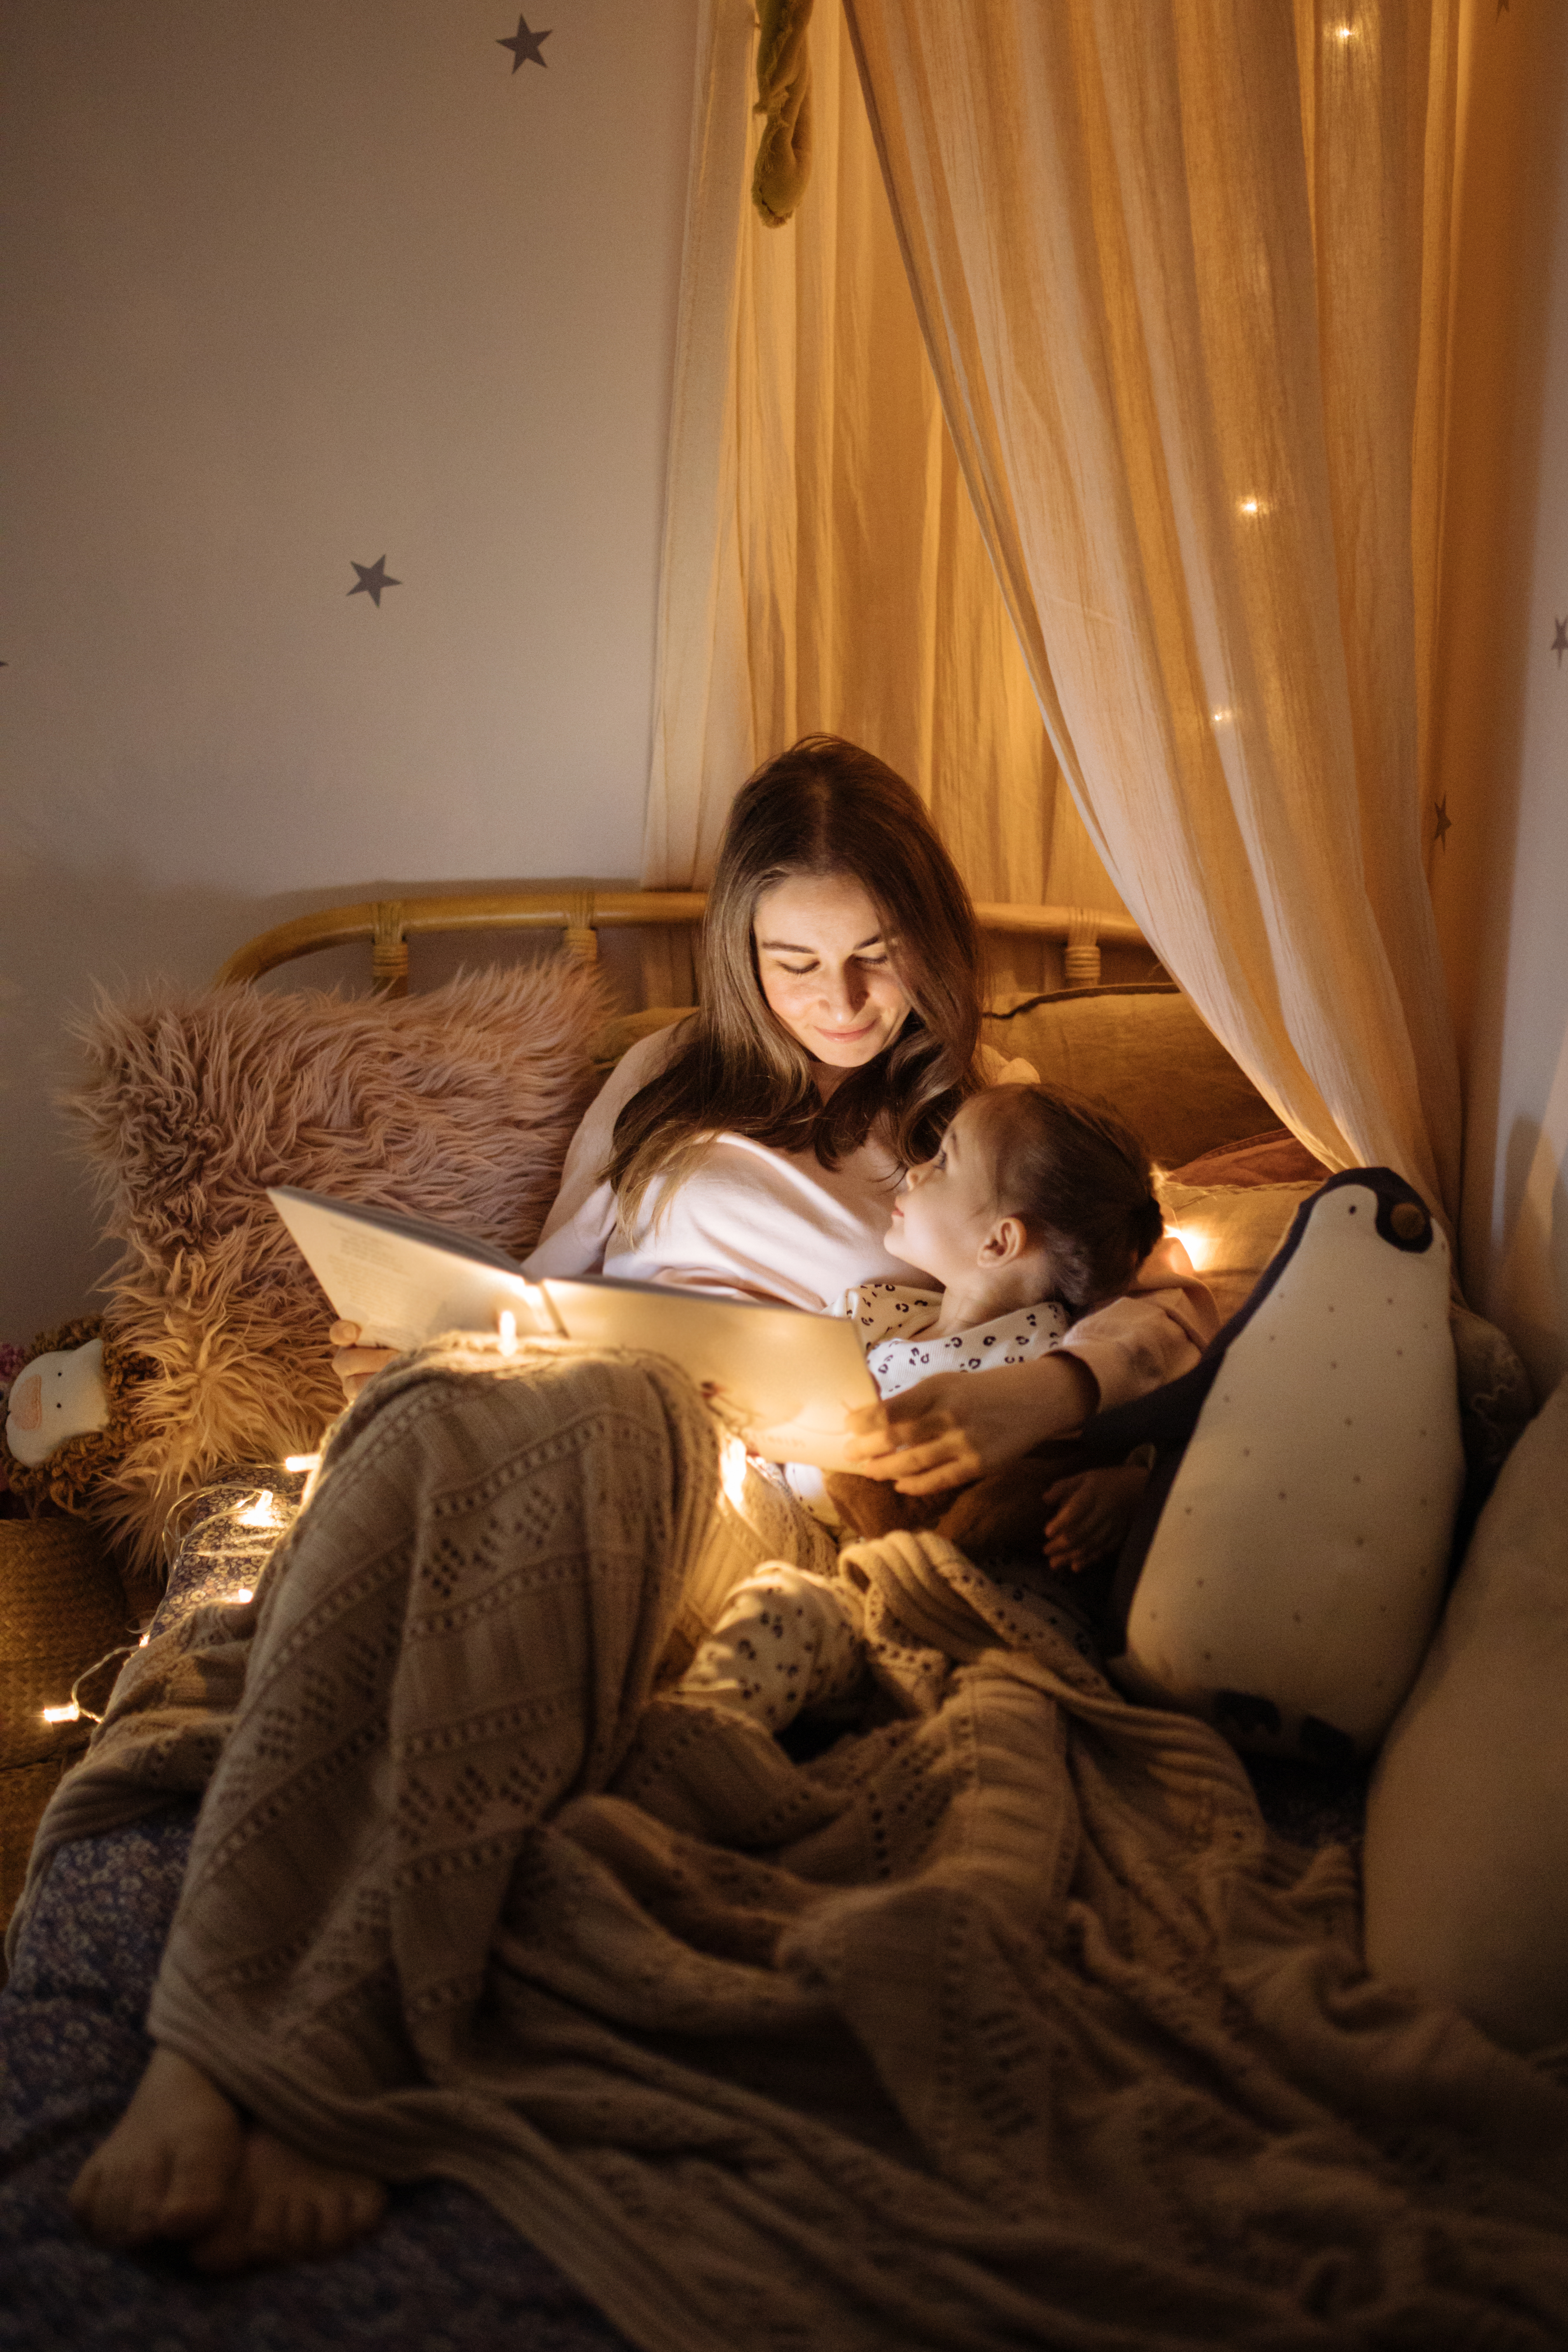 Mother and child reading book in bed before going to sleep | Source: Getty Images